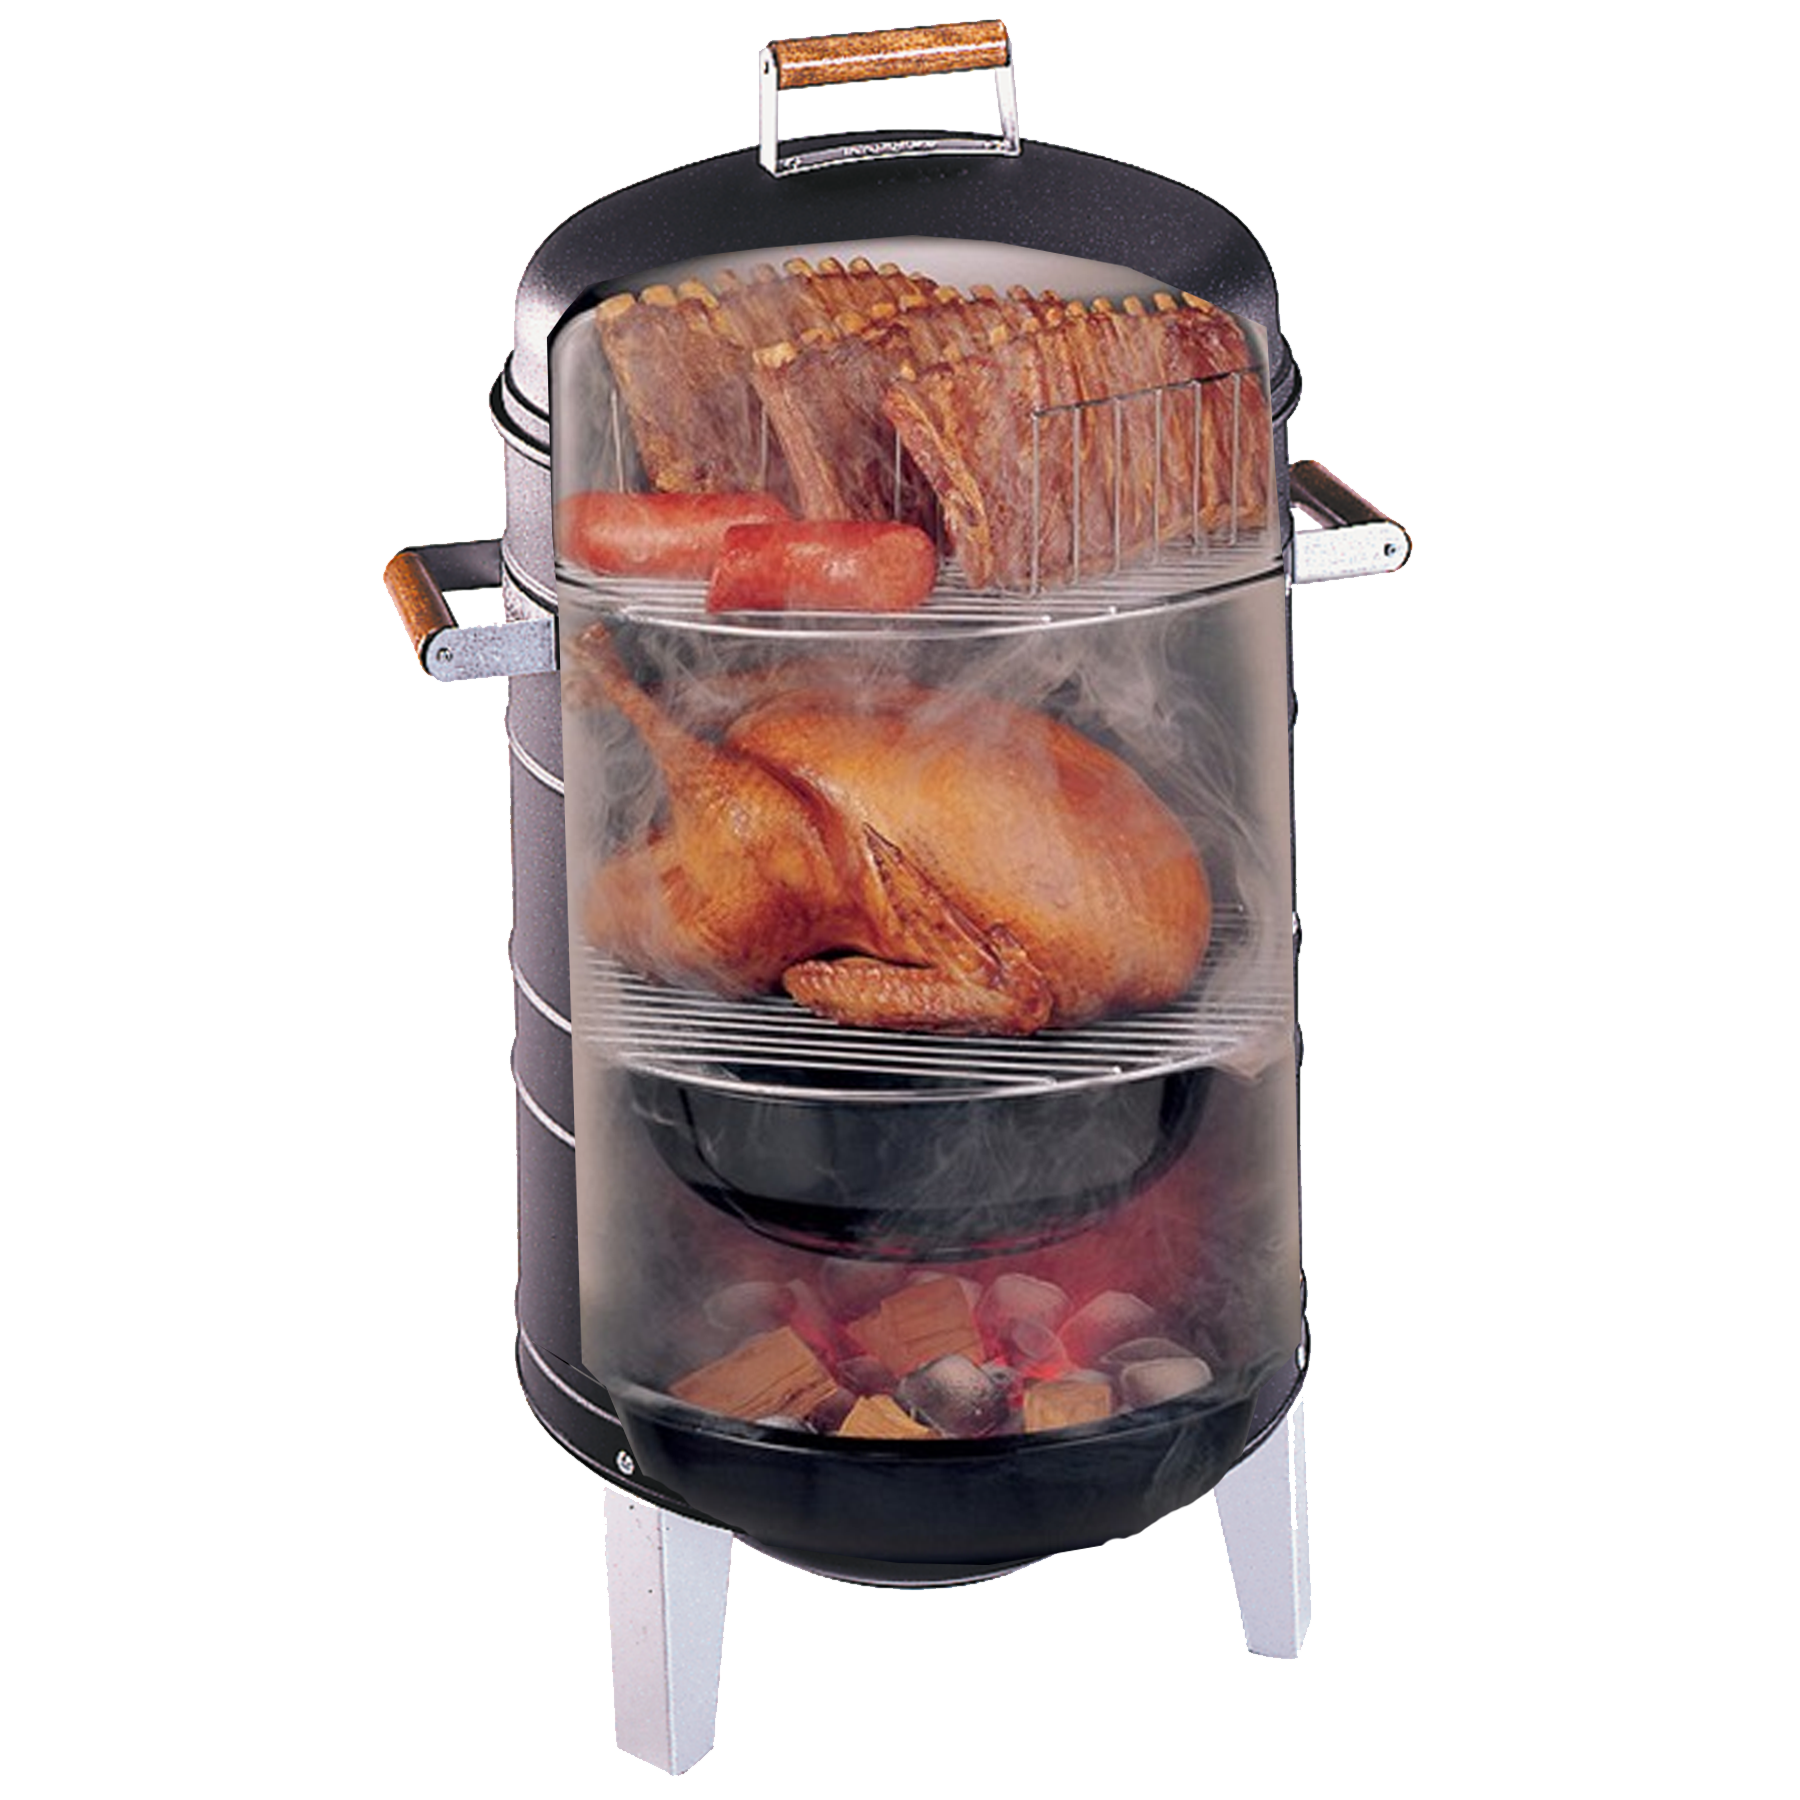 Americana Charcoal Water Smoker with 2 Levels of Cooking - image 2 of 7